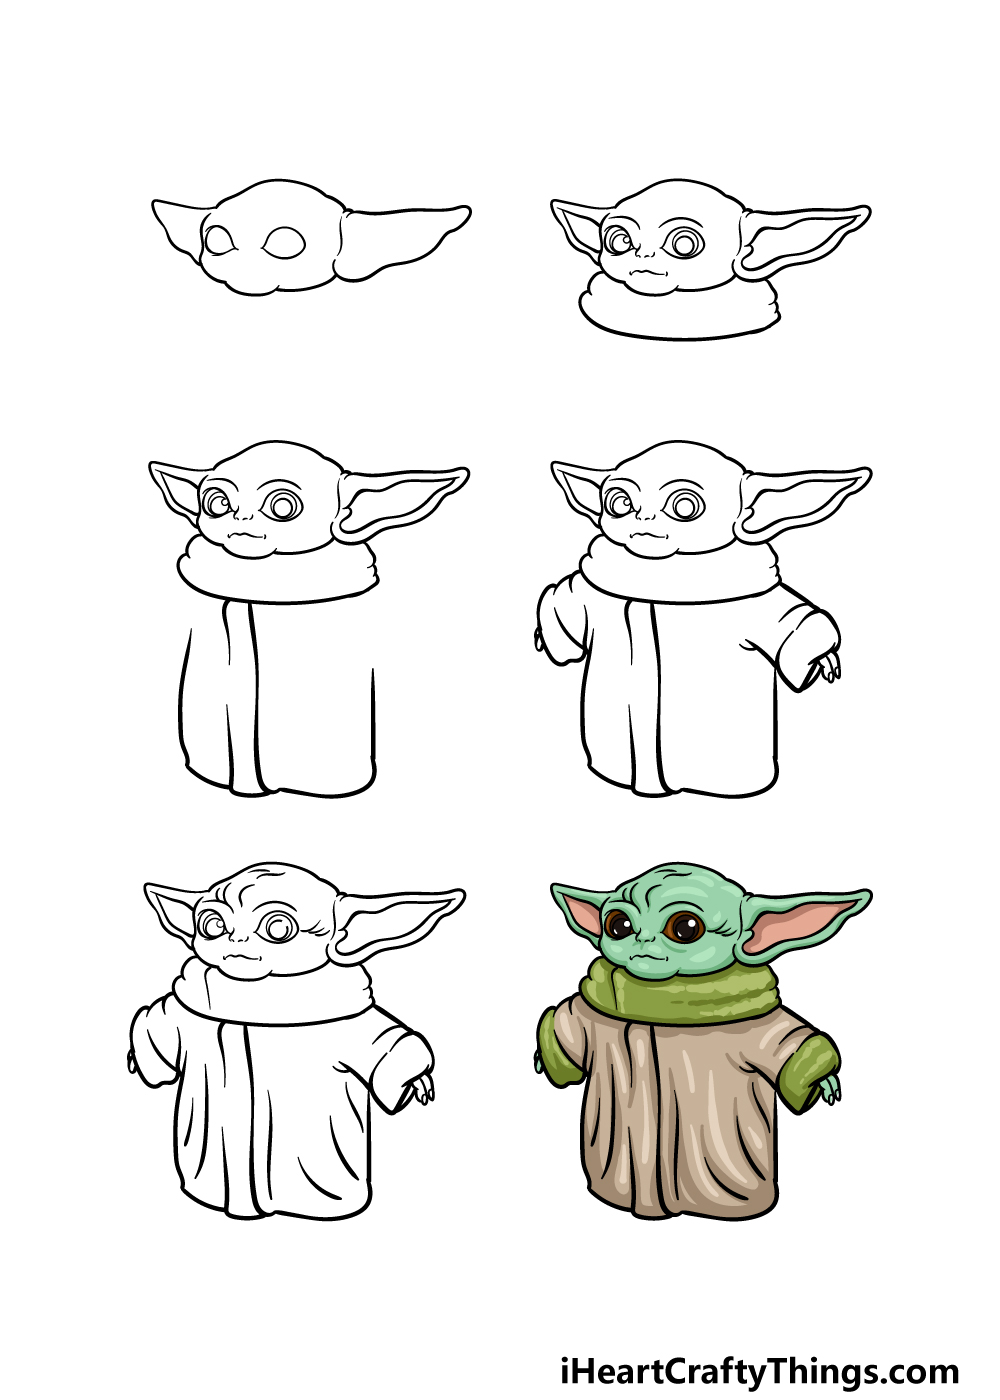 how to draw Baby Yoda in 6 steps